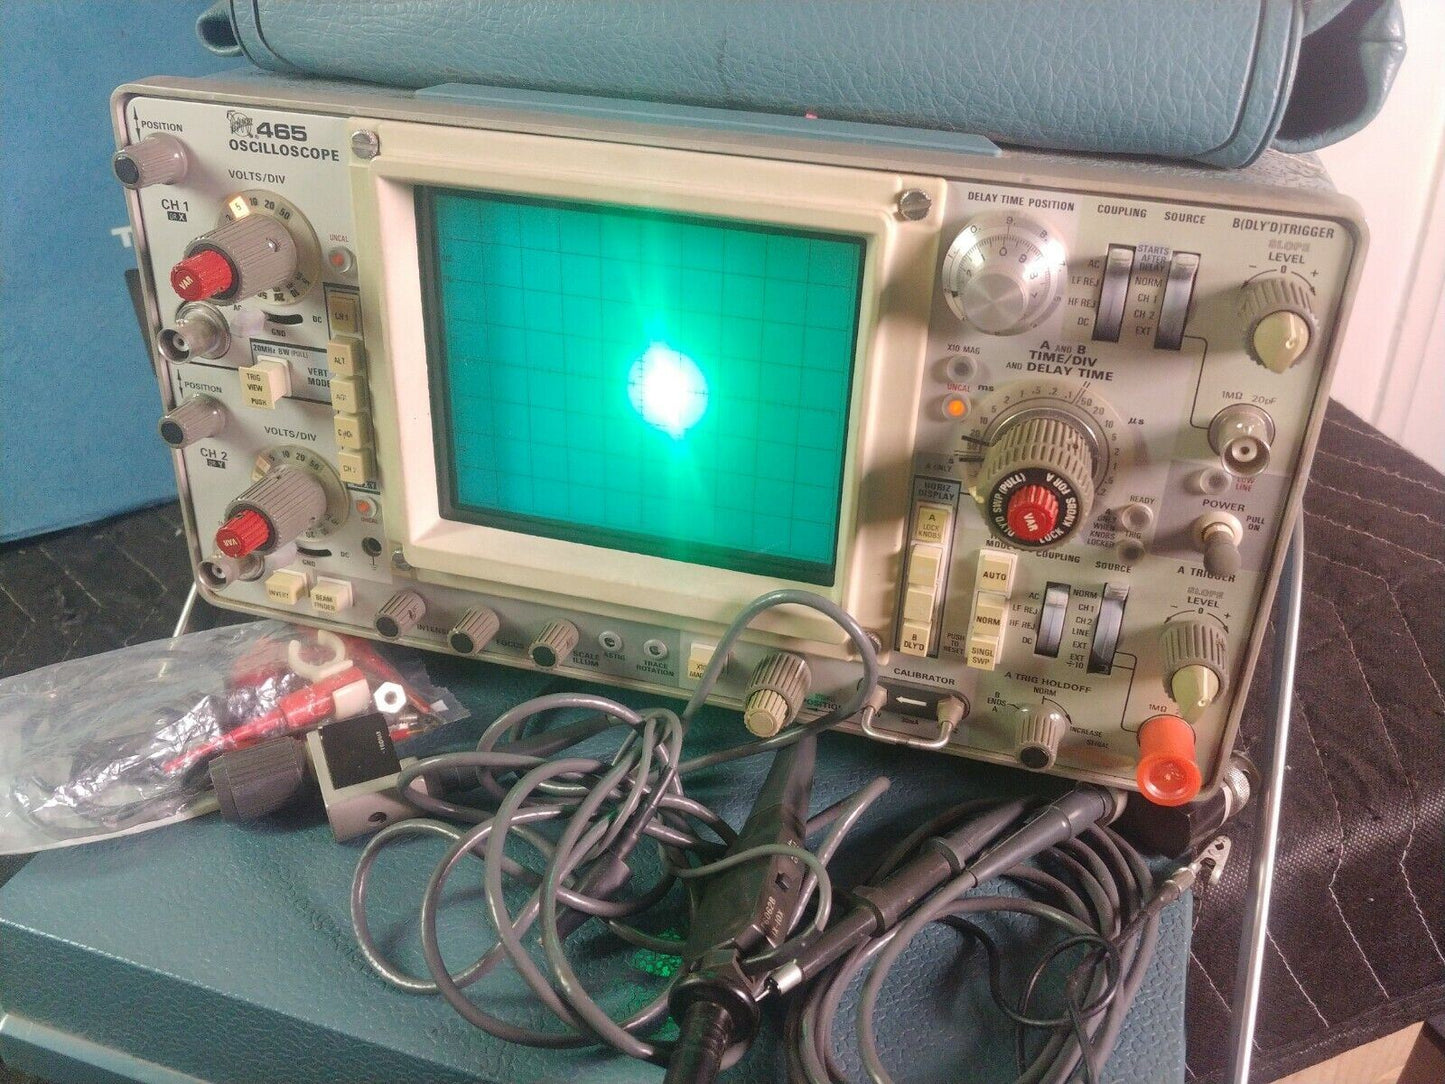 Tektronix 465 100 MHz, Dual-channel Oscilloscope w/ Probes and Manual